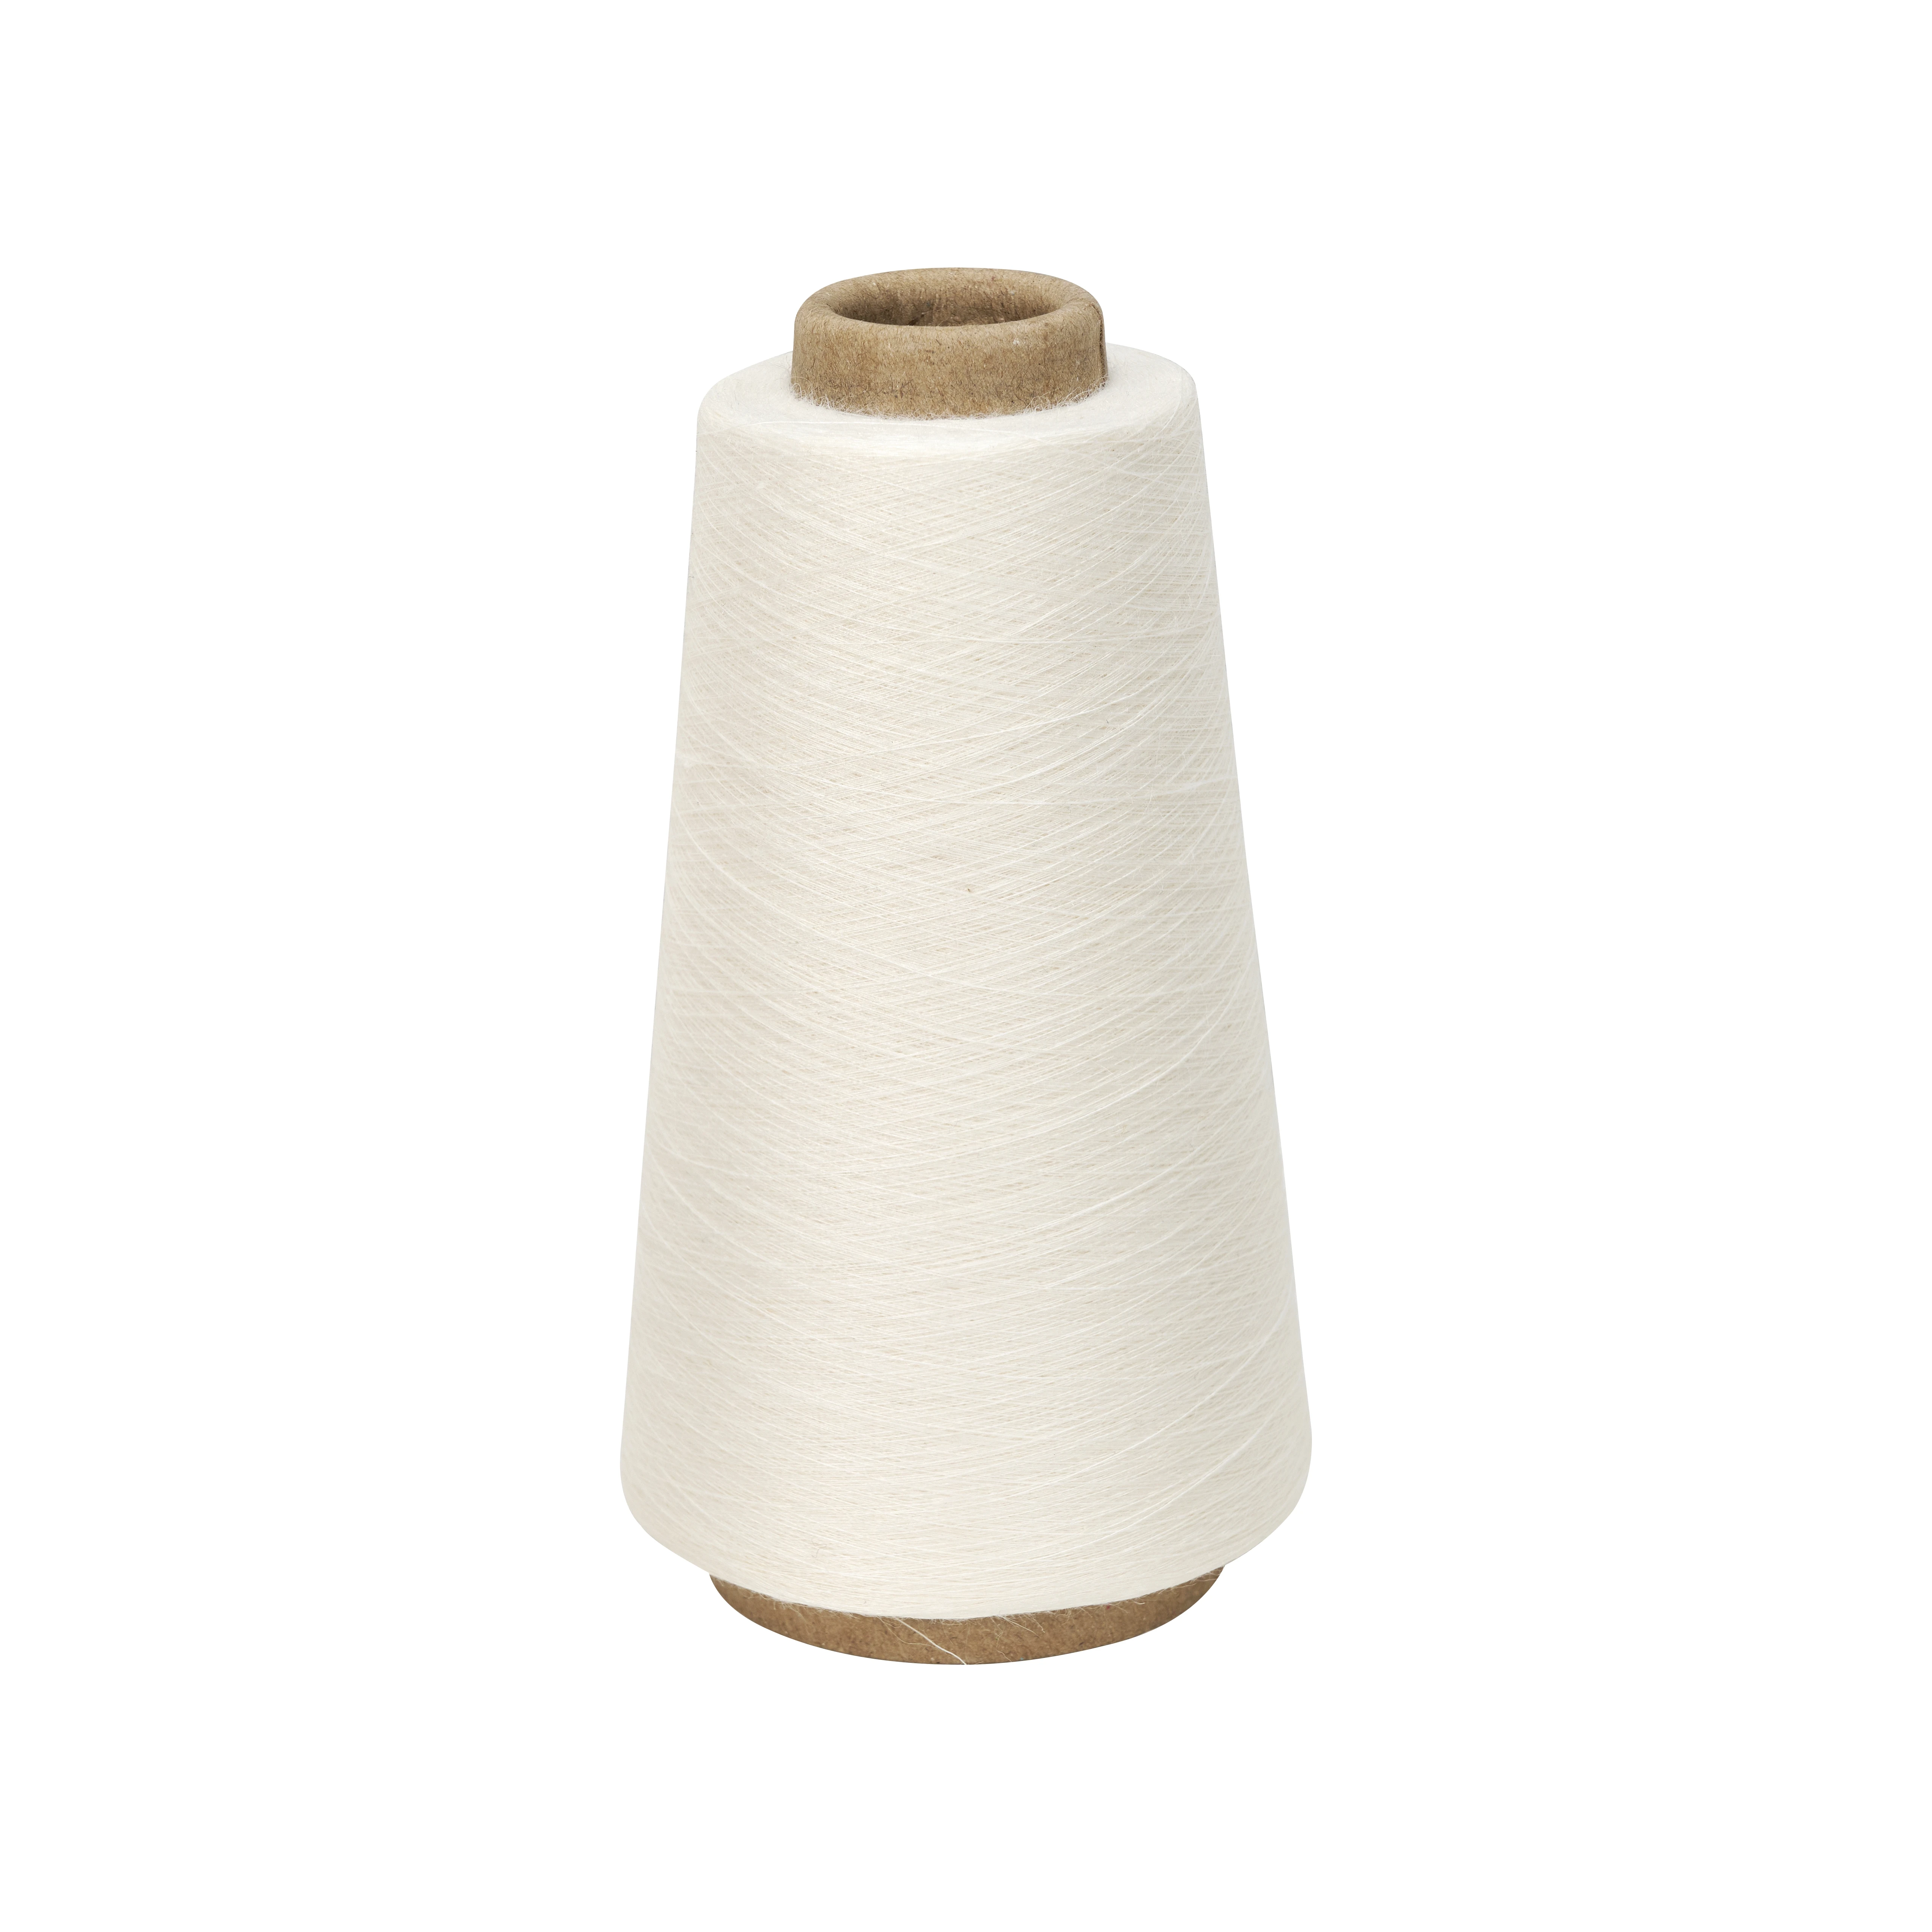 Moisture-Absorbent Clothing Material Blended OE Ramie Yarn 36Nm In White Custom Order By Request Produced In Vietnam